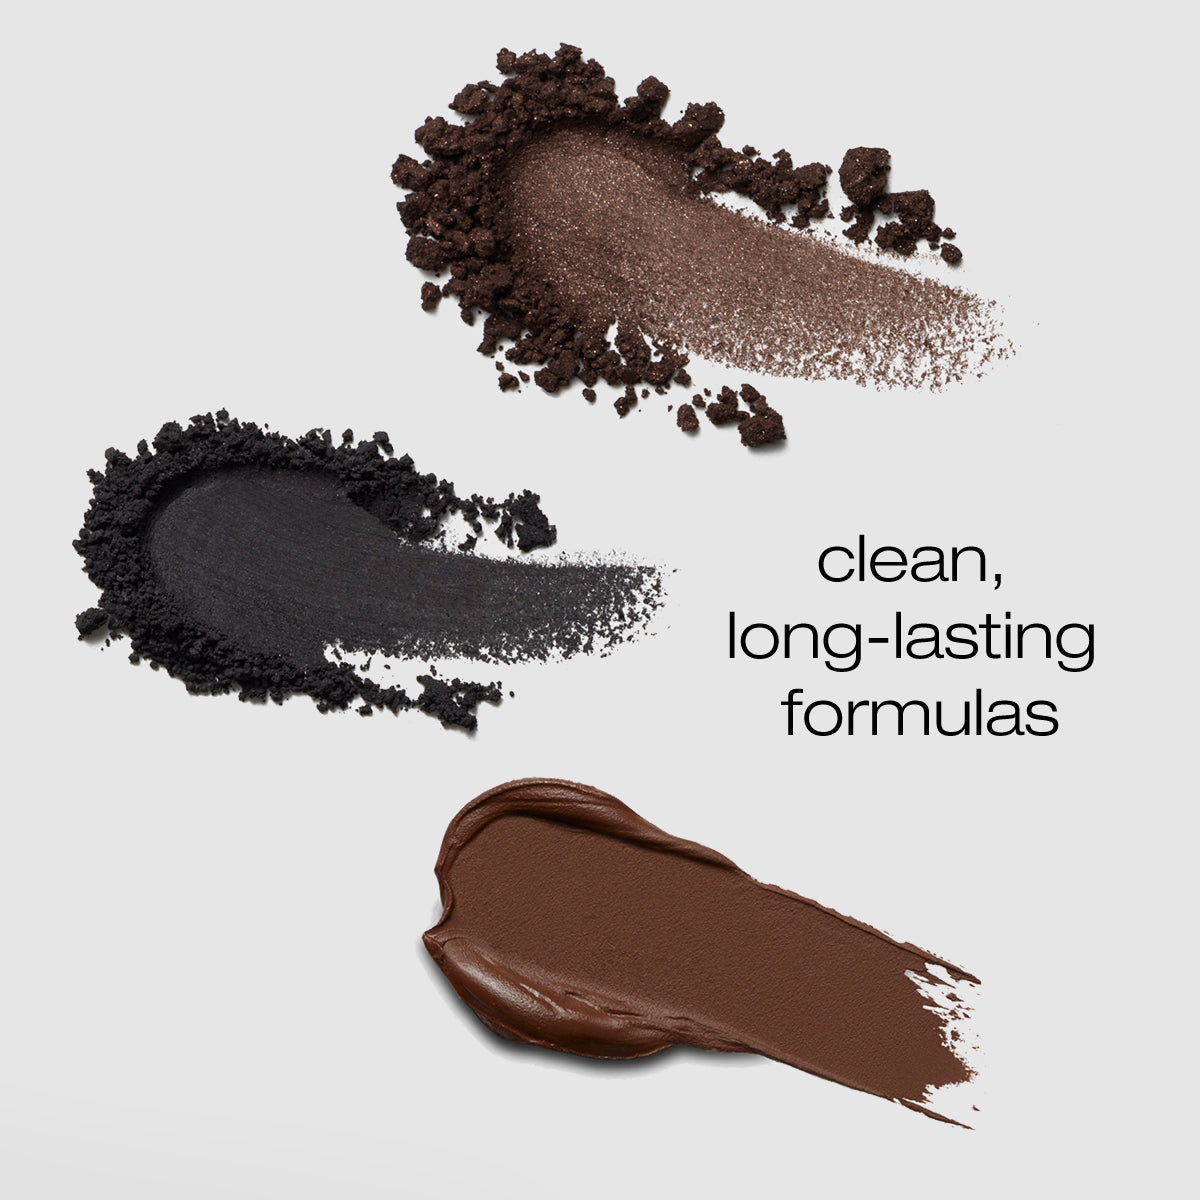 3 Smudges of the palette showing the eyeliners are powder based and concealer is cream for clean, long-lasting formulas